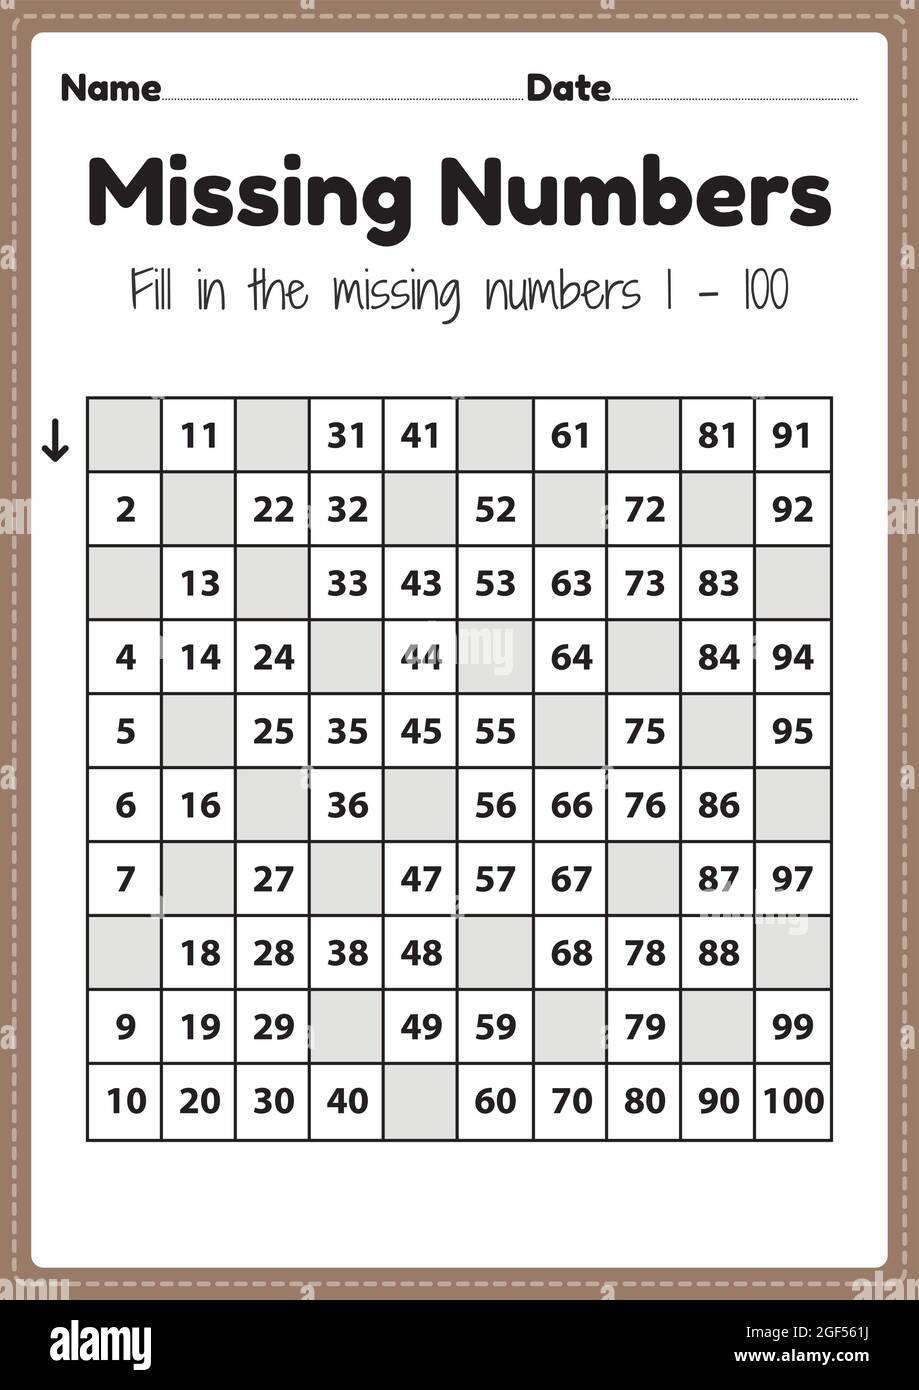 maths worksheets missing numbers 1 to 100 printable sheet for preschool and kindergarten kids activity to learn basic mathematics skills stock vector image art alamy